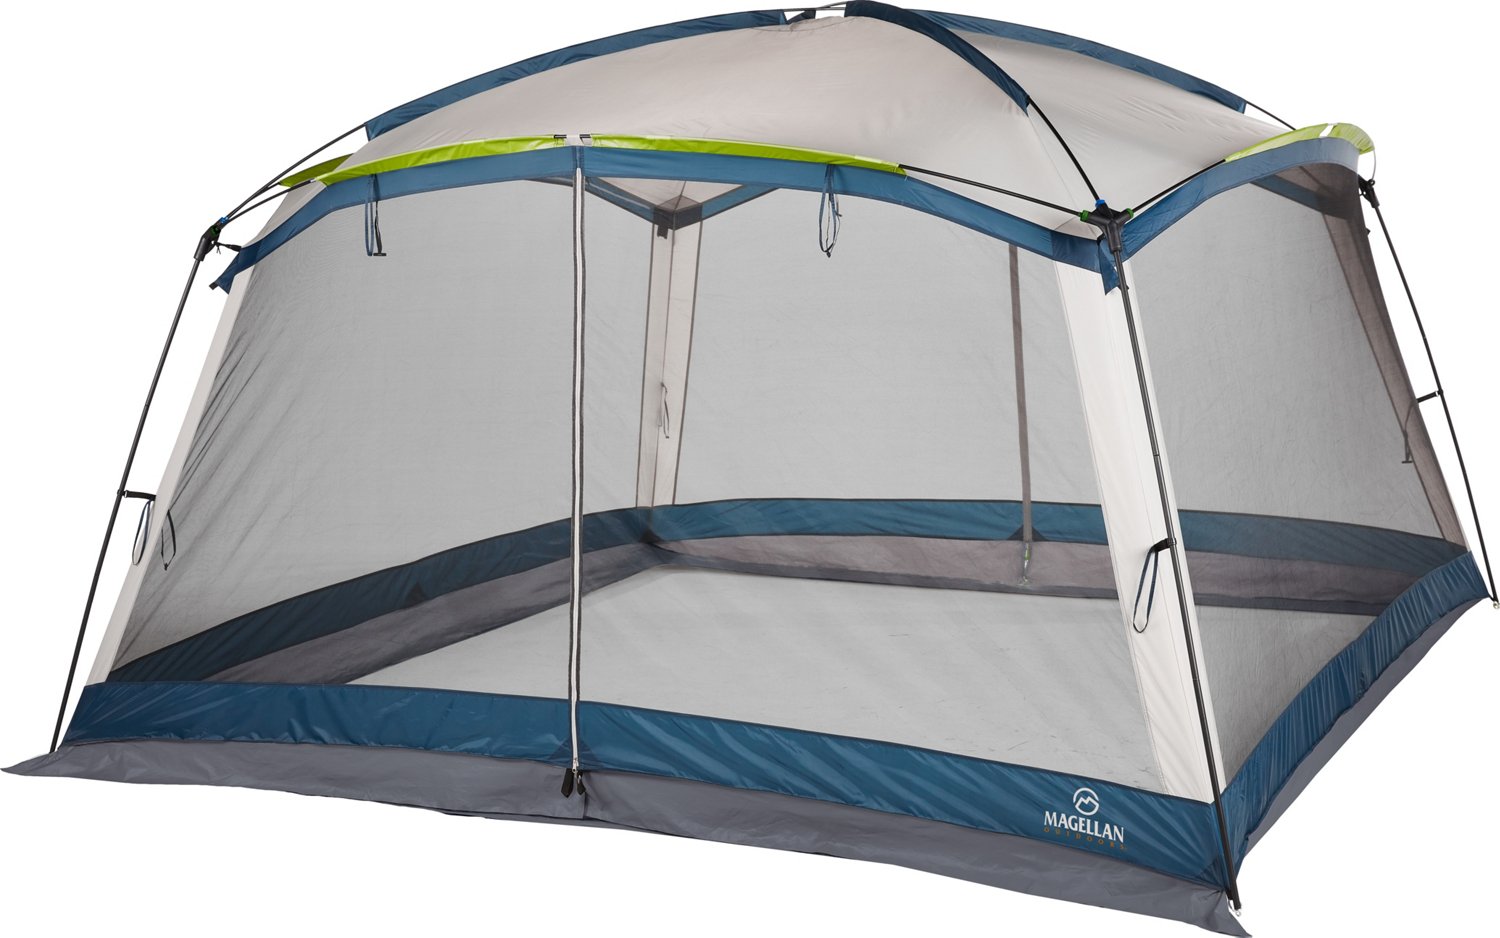 tents for sale online